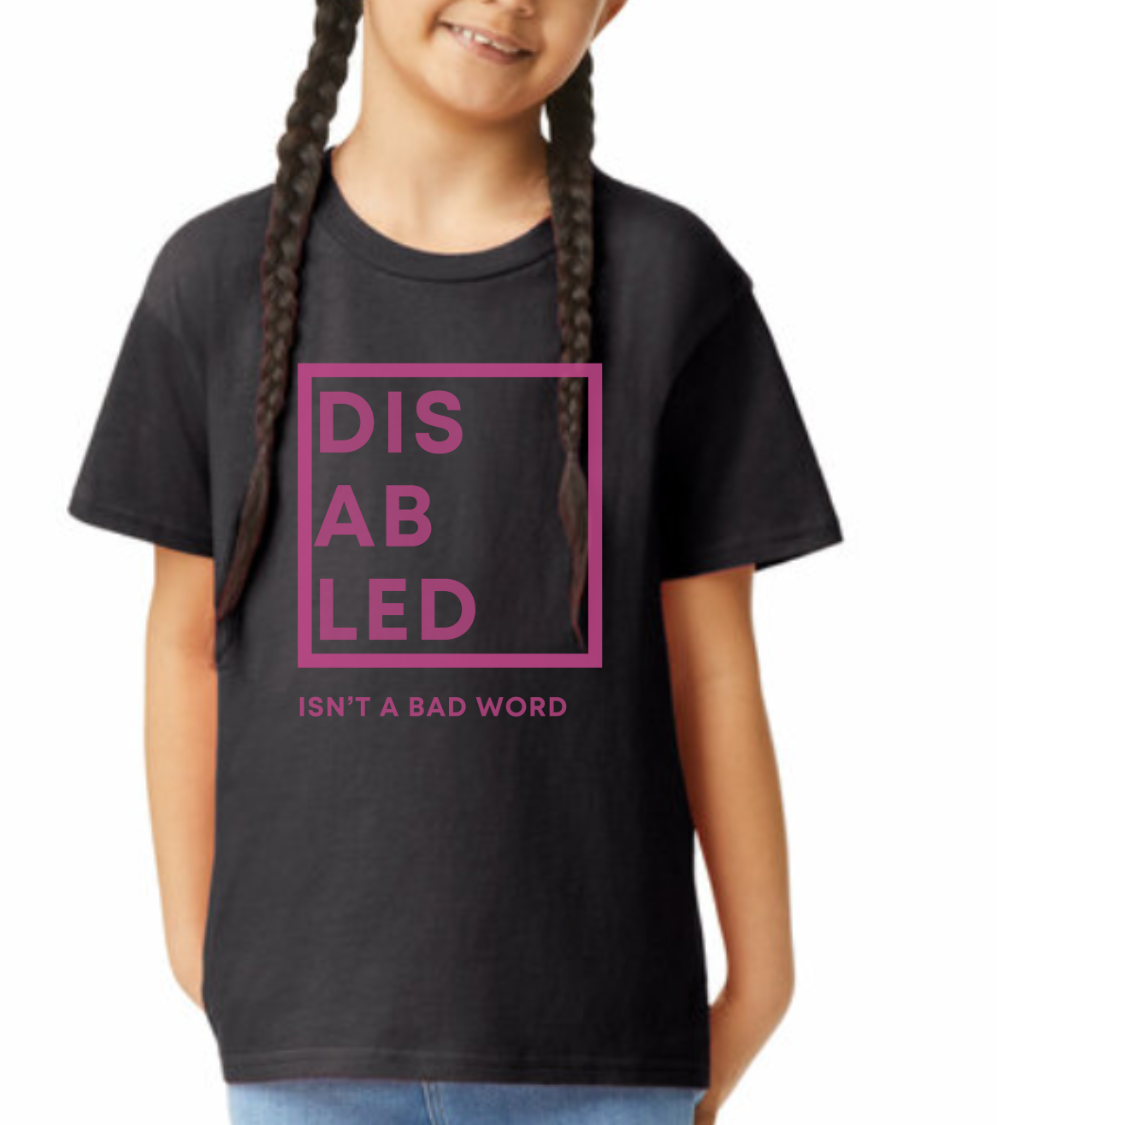 Youth Size Unisex Disabled Isn't a Bad Word - pink logo